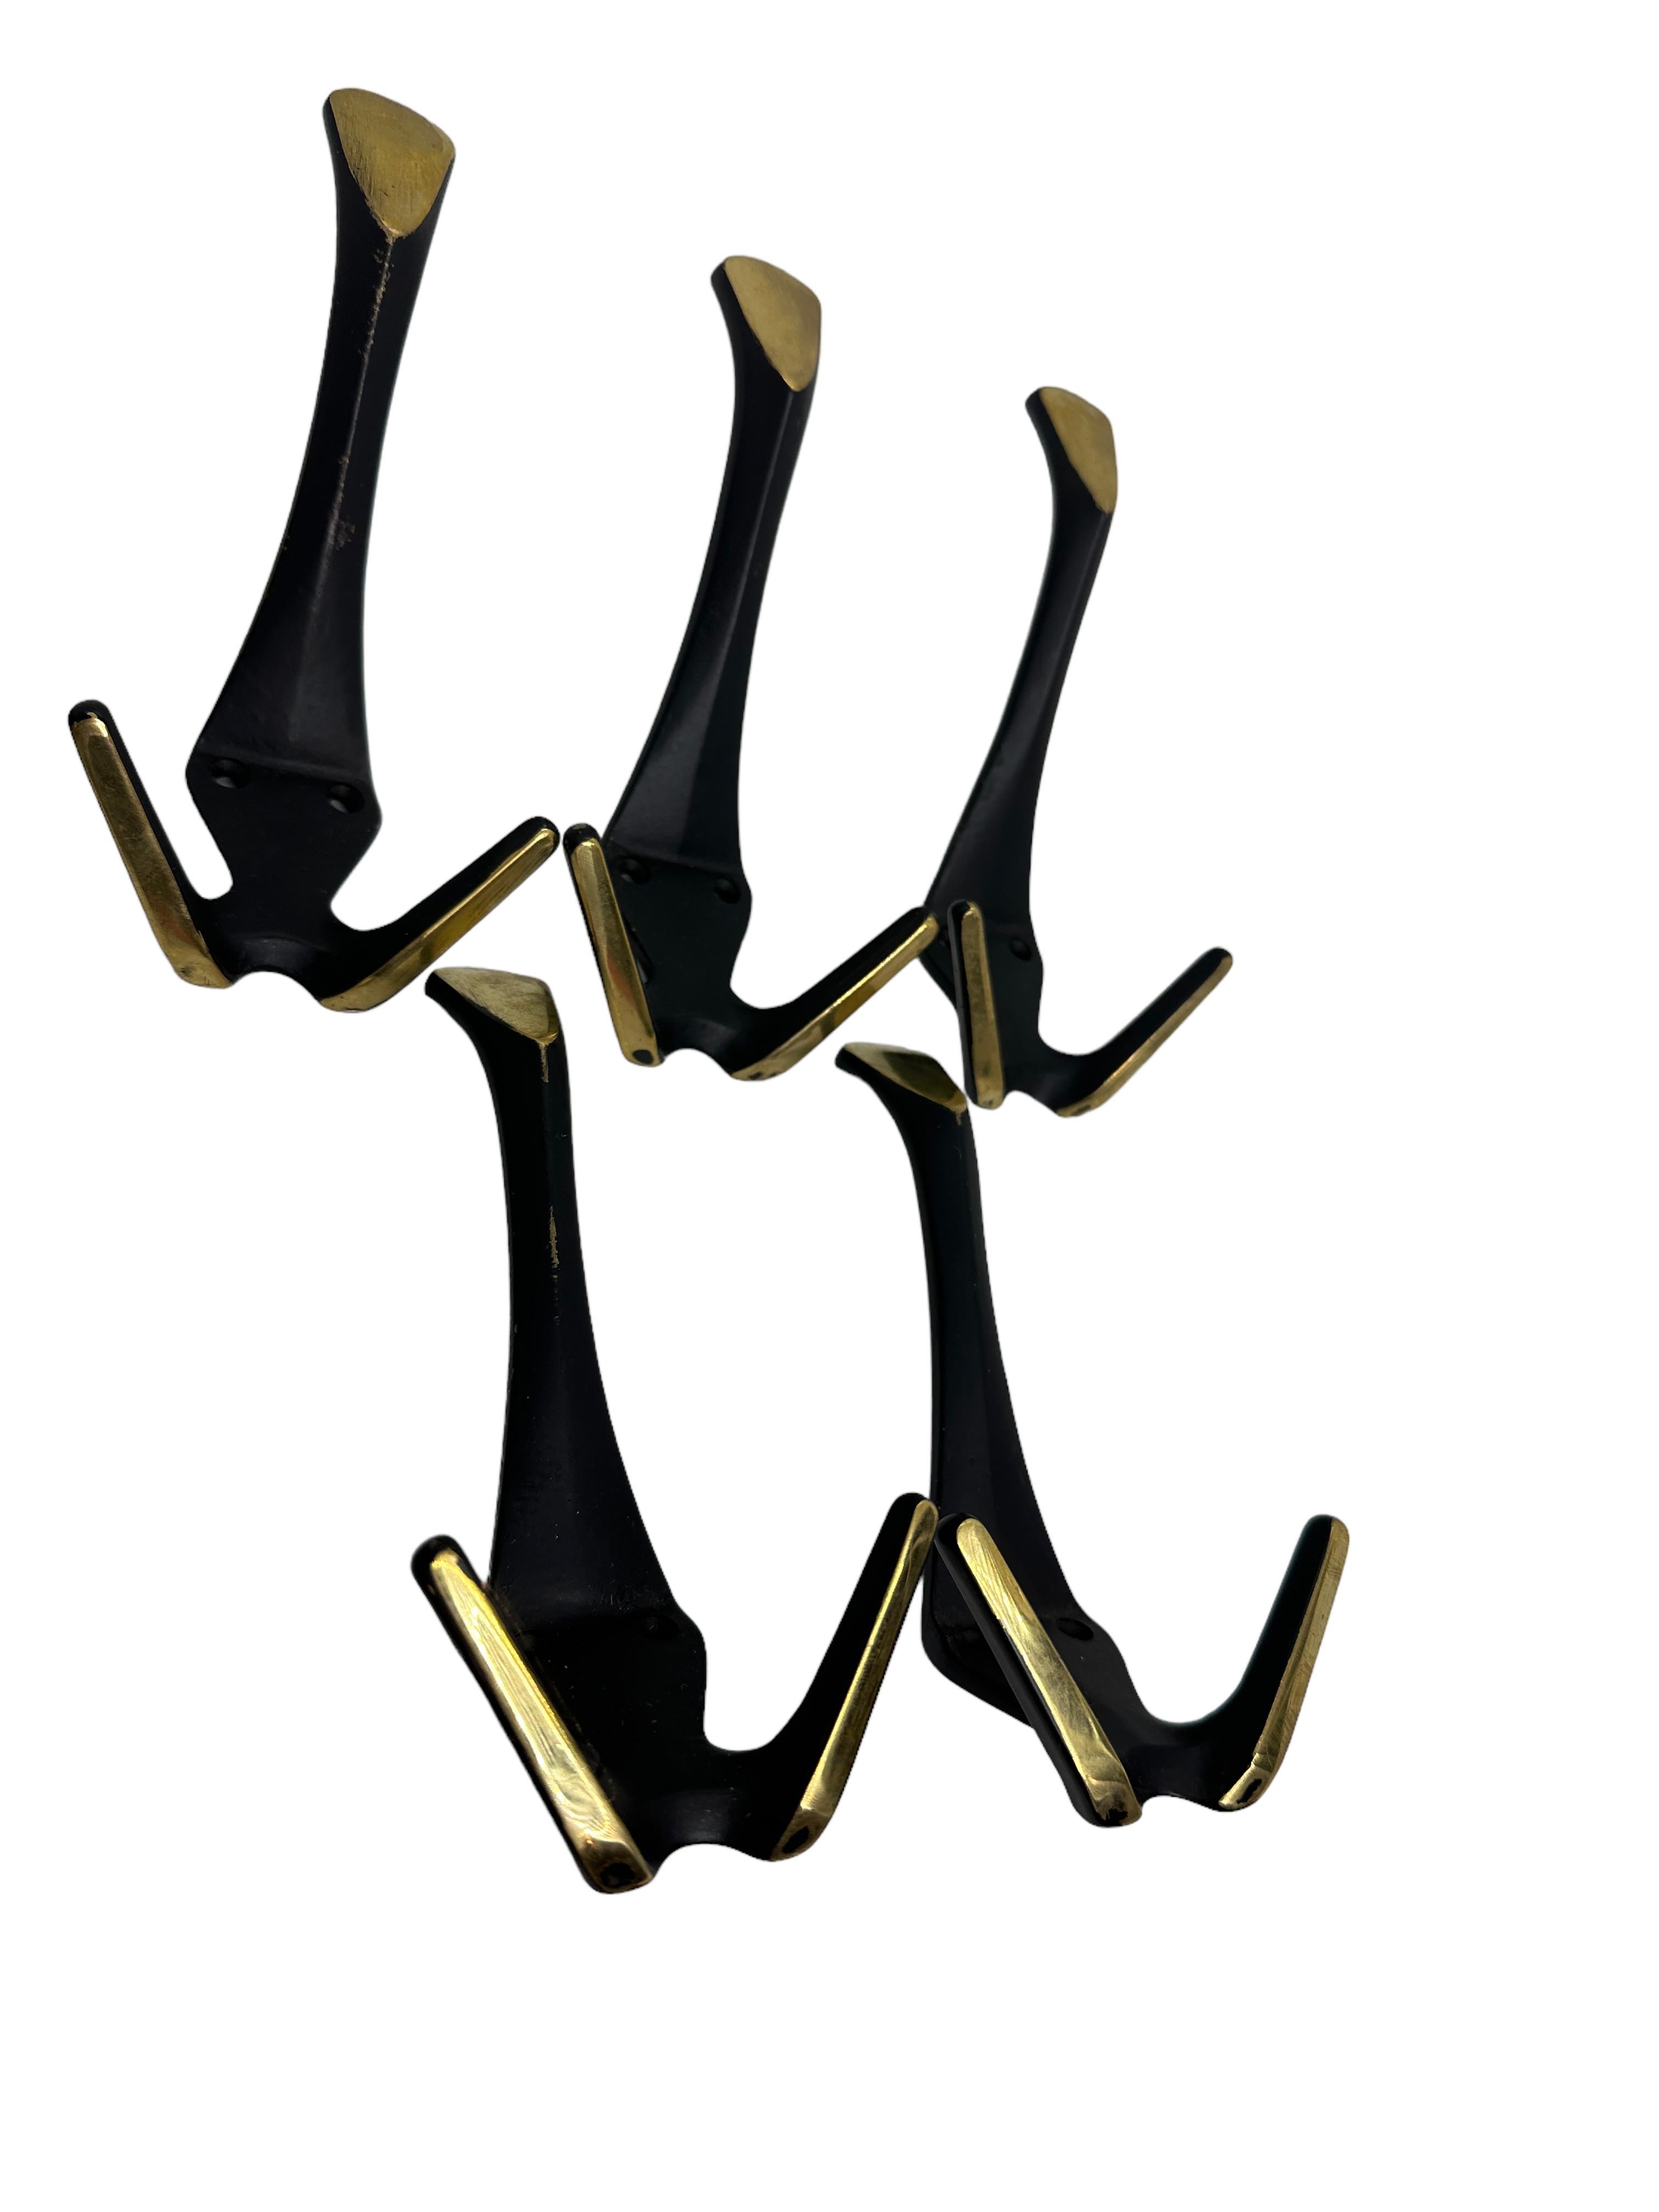 Set of Five Coat Wall Coat Hooks, Black and Brass, Mid-Century Modern, 1950s In Good Condition For Sale In Nuernberg, DE